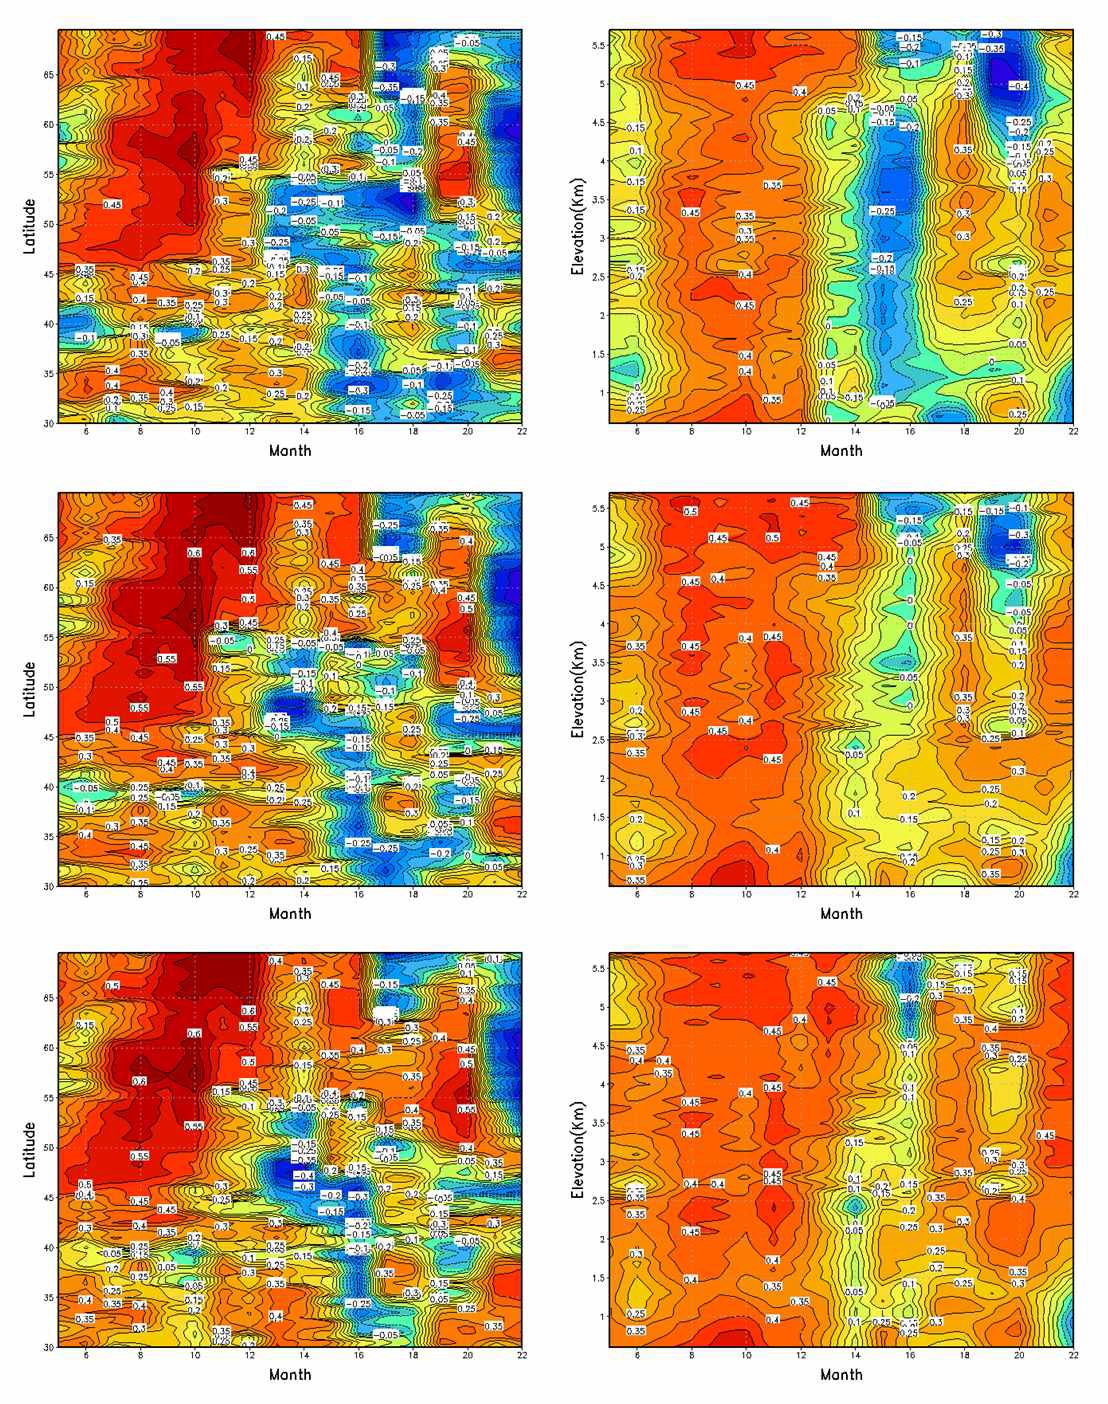 Fig. 3.4.27. Correlation between monthly NDVI and temperature (Ave., Max., and Min.) for the mid- to high latitude area(30~70˚N, left panel), and according the elevation(right panel).